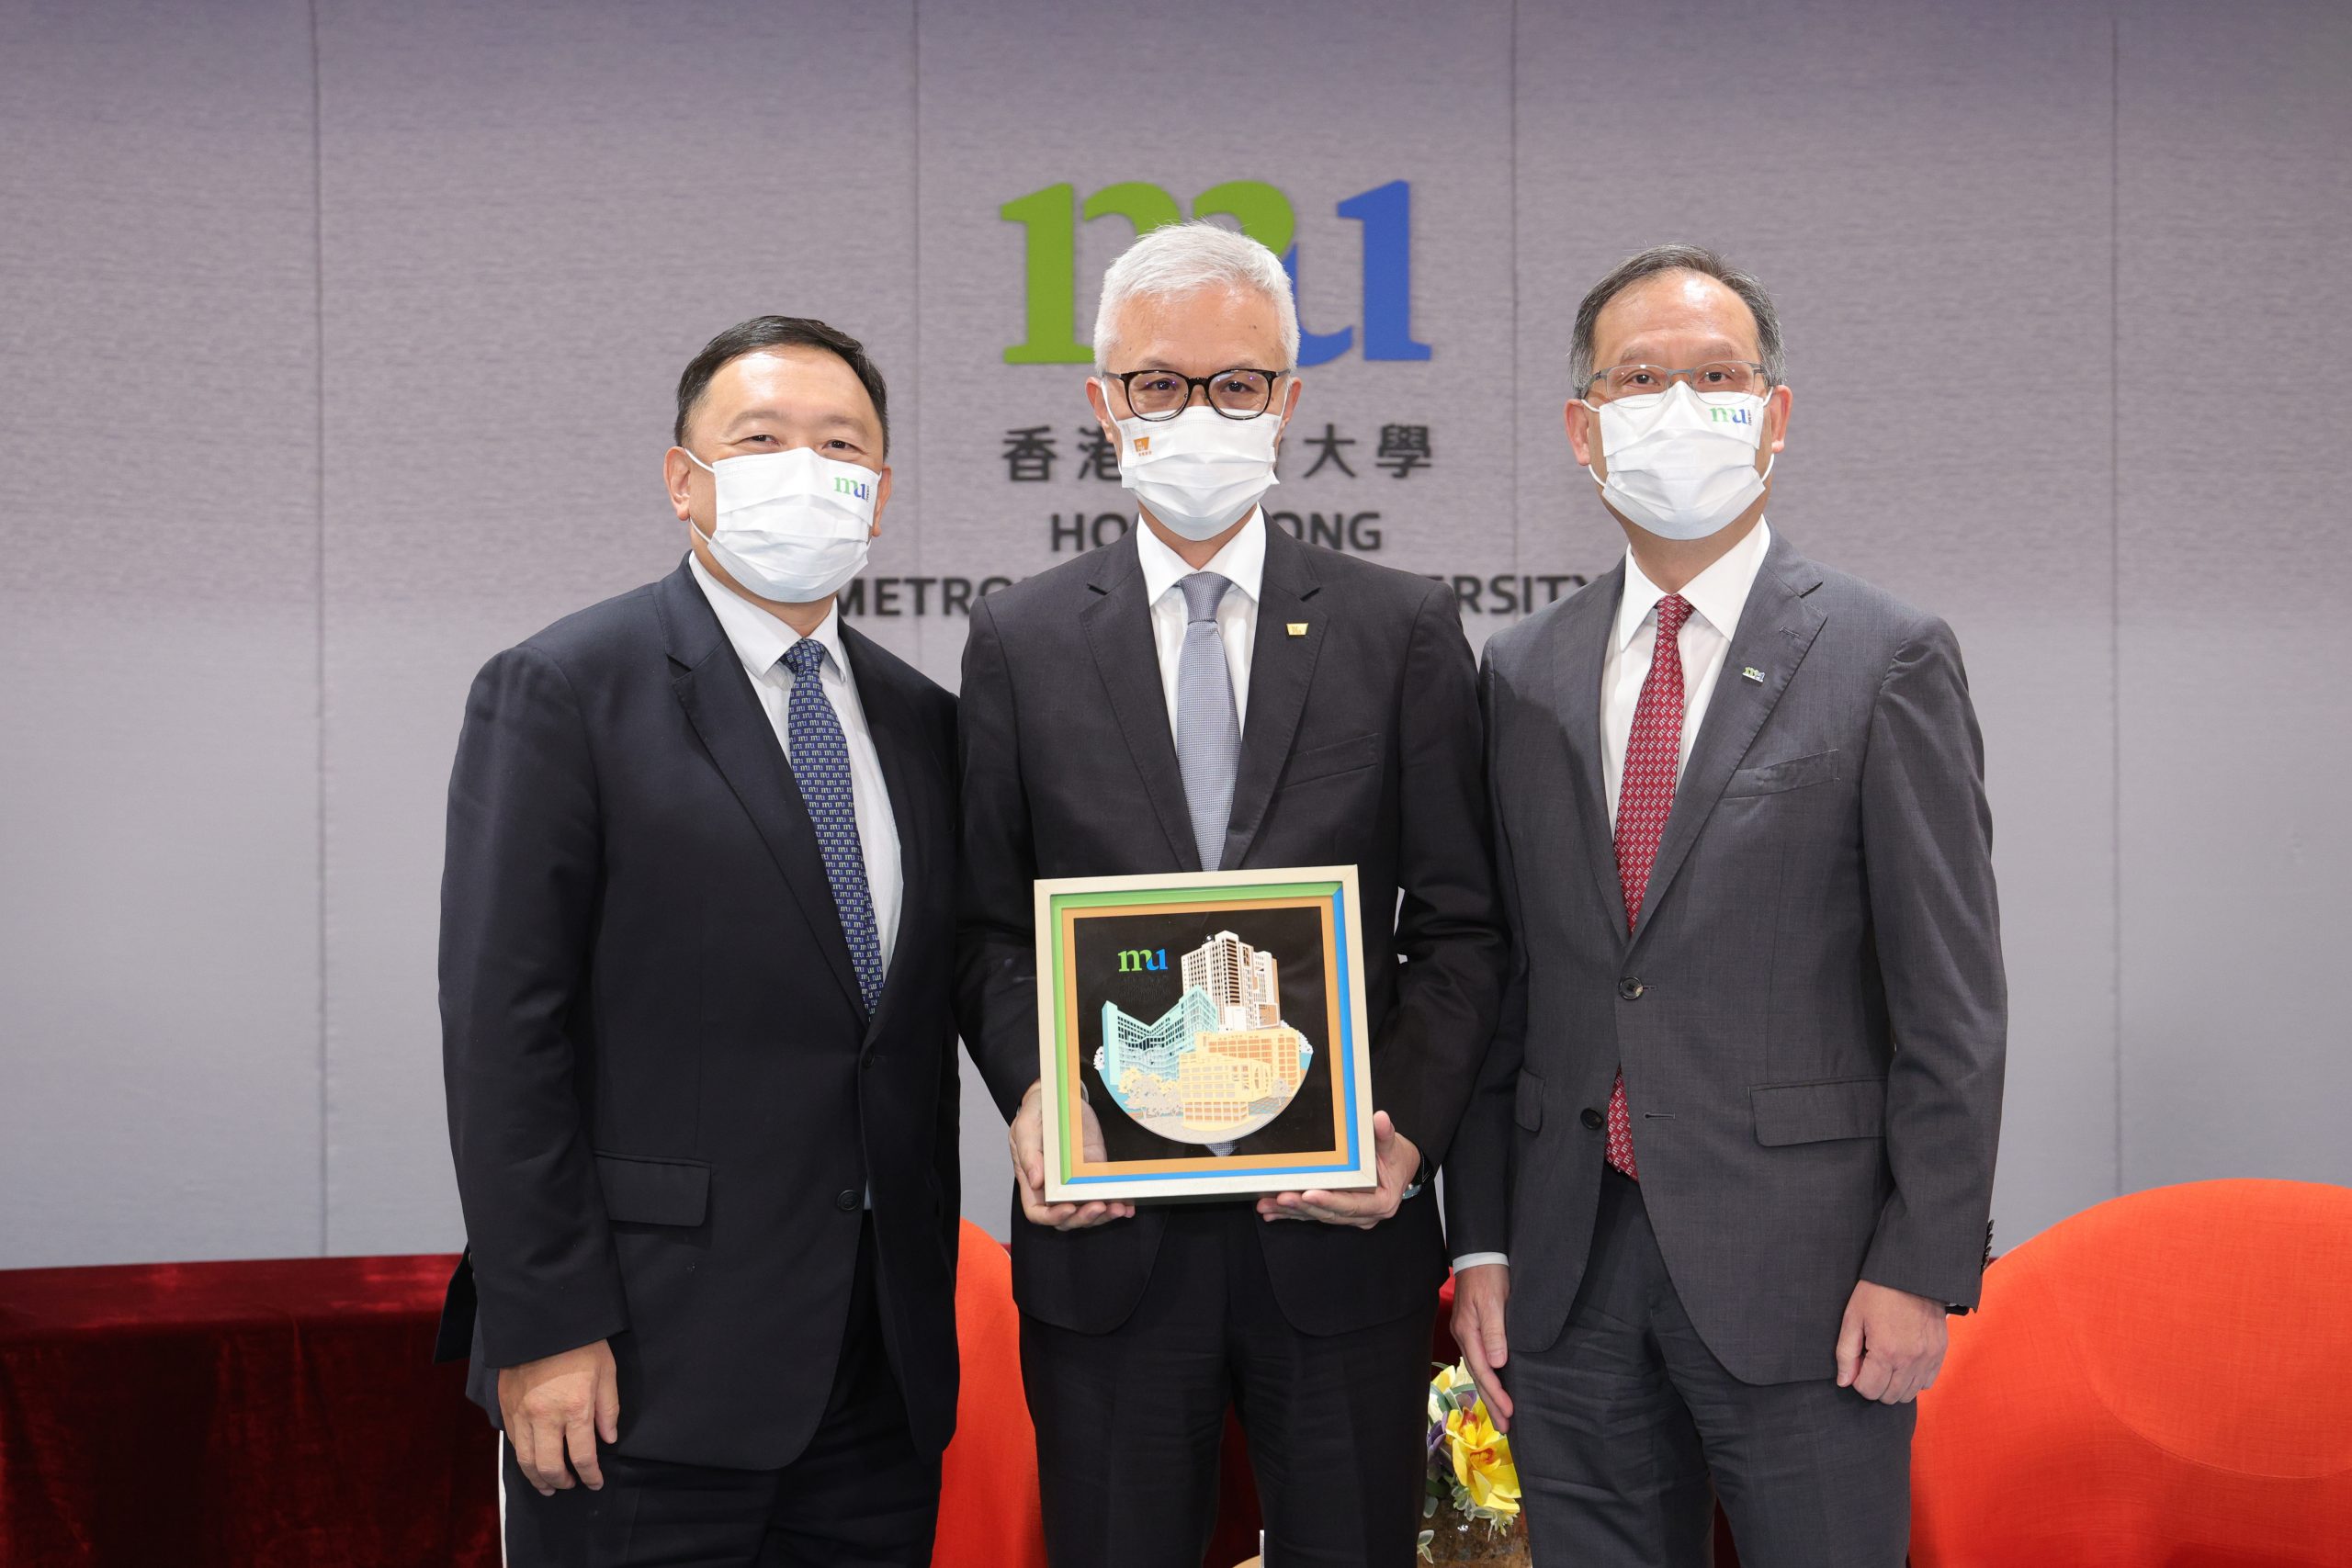 HKMU Council Chairman Ir Dr Conrad Wong Tin-cheung (left) and President Prof. Paul Lam Kwan-sing (right) present a souvenir to Director of the Hong Kong Palace Museum Dr Louis Ng Chi-wa (middle).